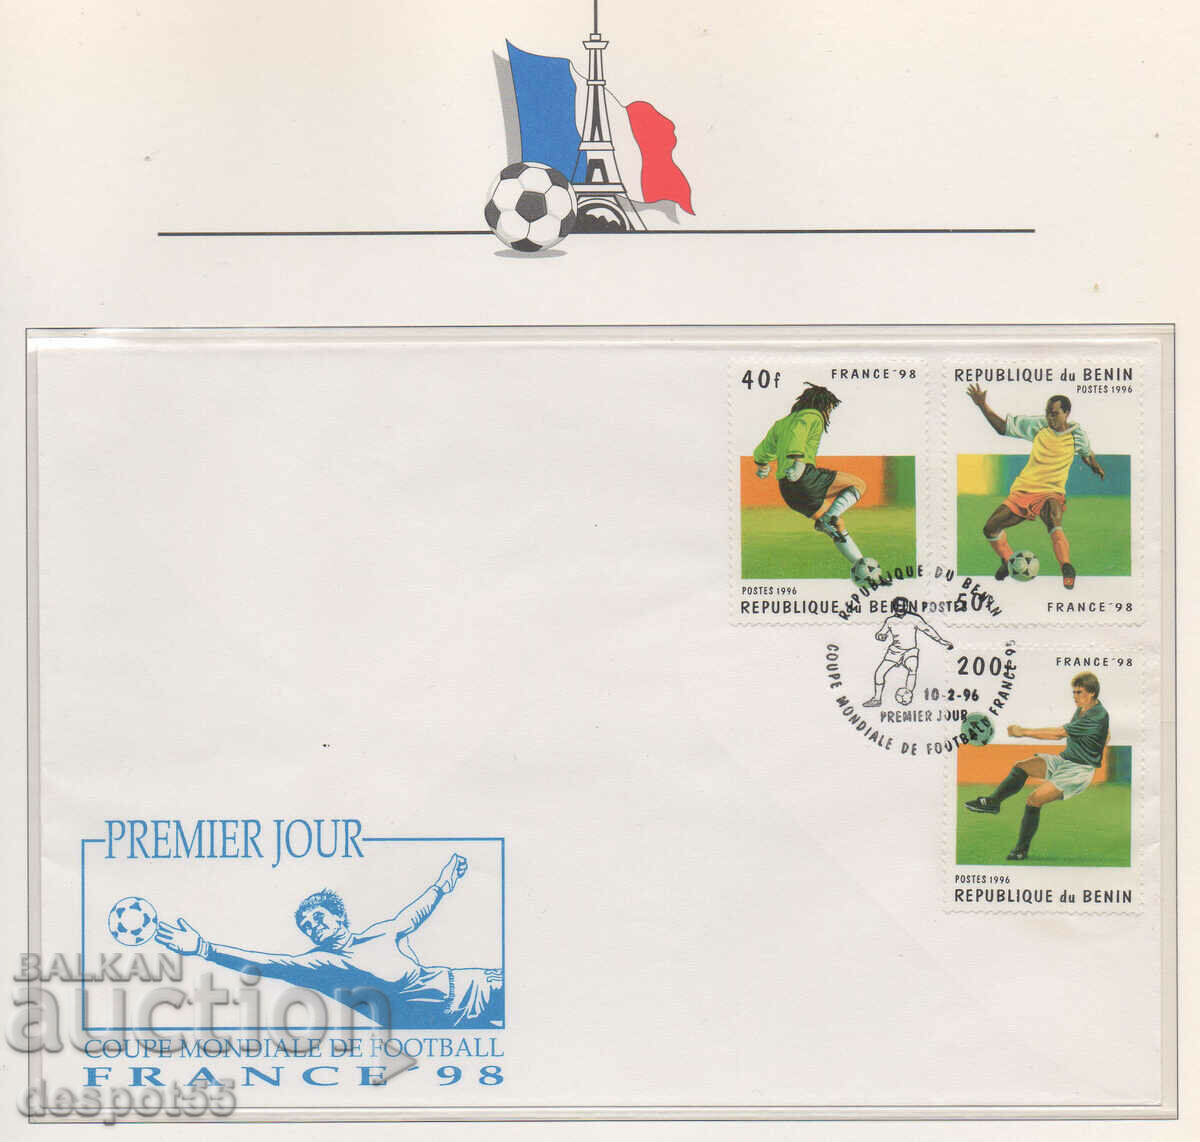 1996. Benin. World Cup in football - France '98. An envelope.